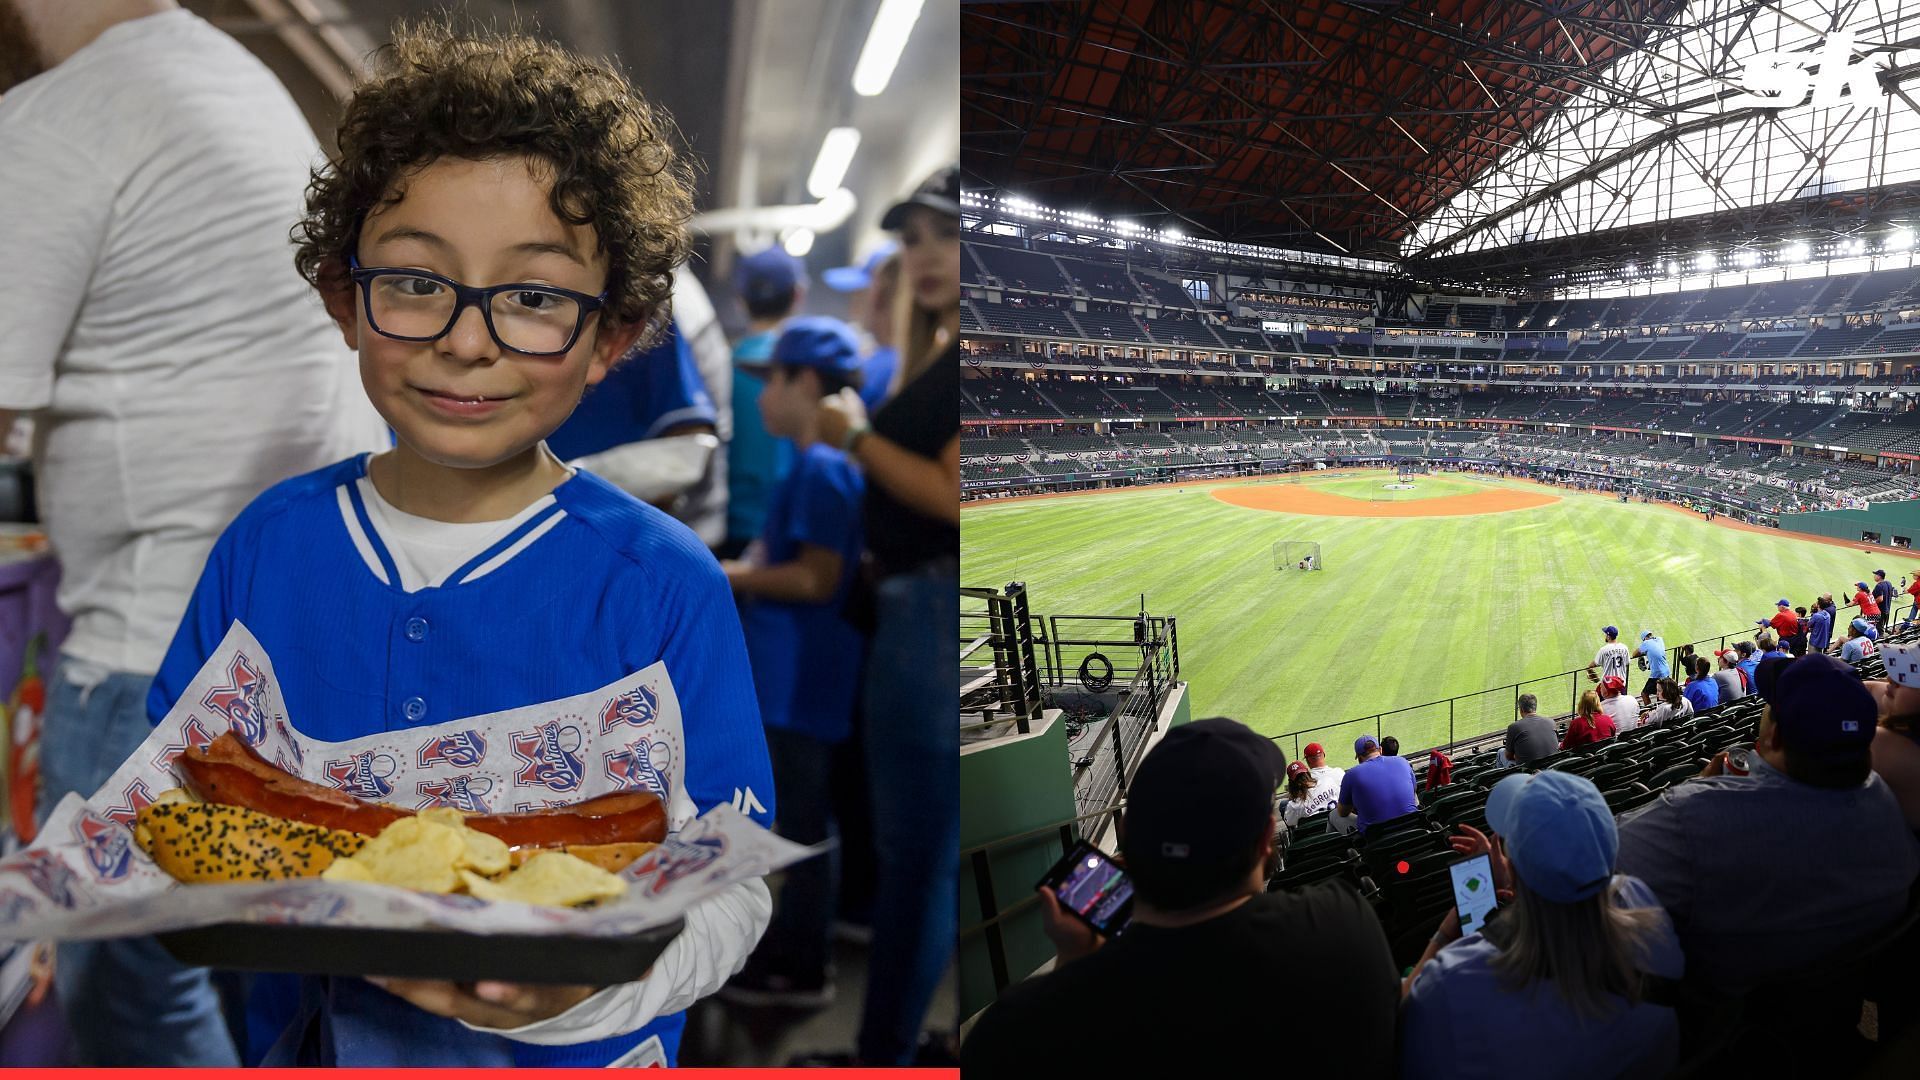 Some of the new foodfare at Globe Life Field elicited mixed responses from fans